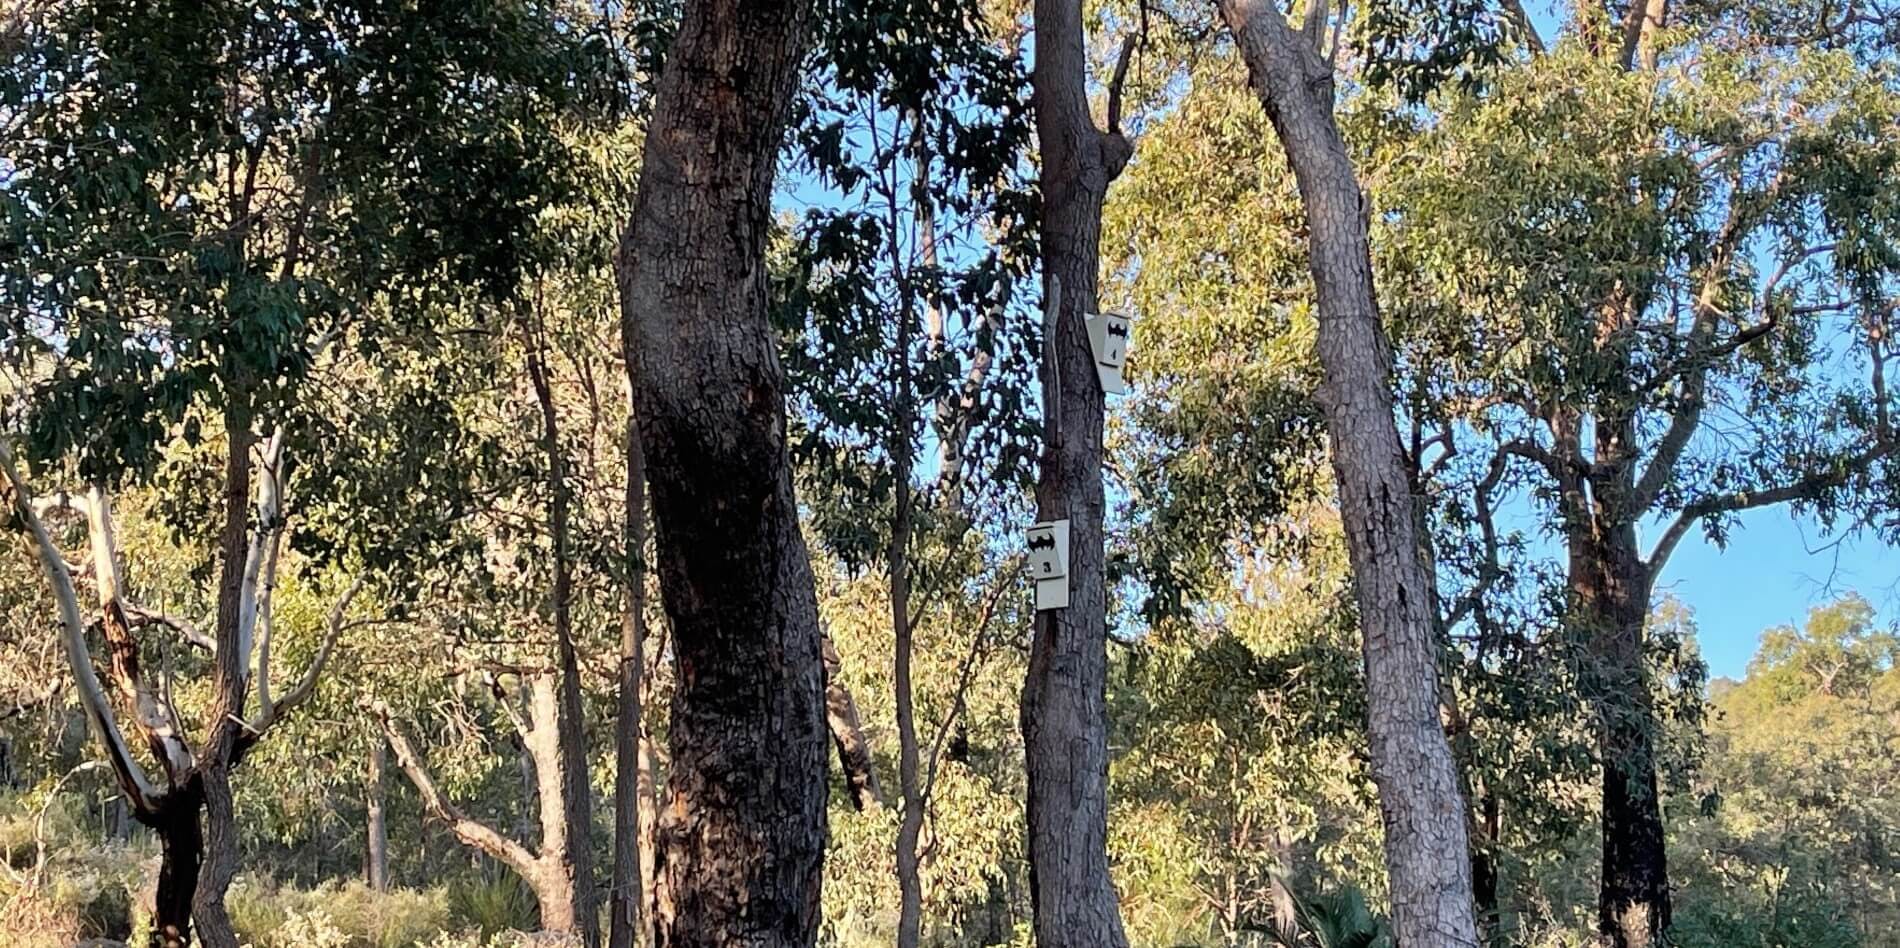 Microbats boxes at Mundy Regional Park located in Lesmurdie